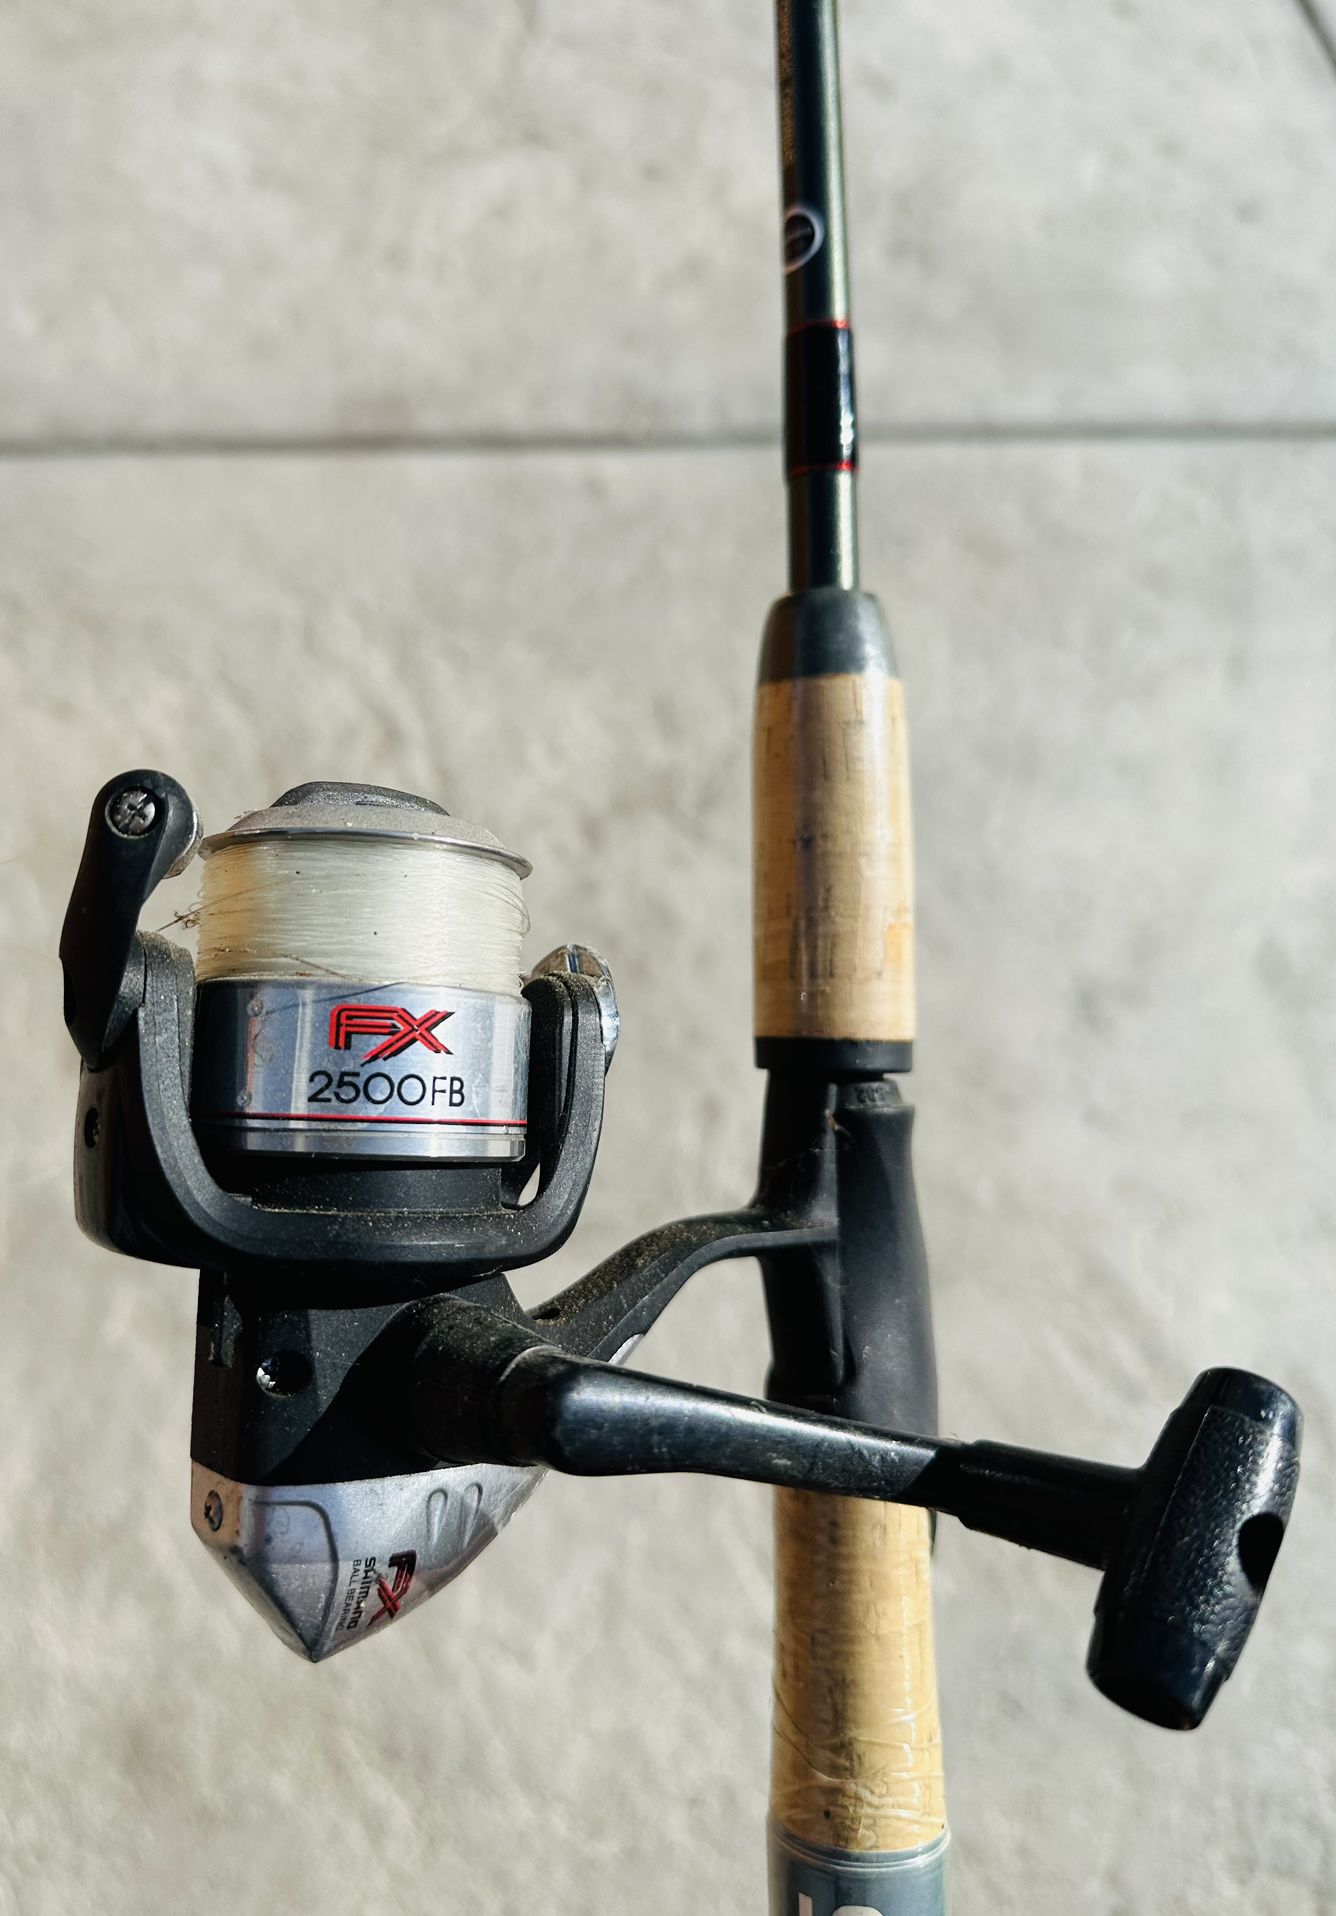 Shimano FX 2500 FB Spinning Fishing Reel and Shimano Scabard Rod - Good condition 